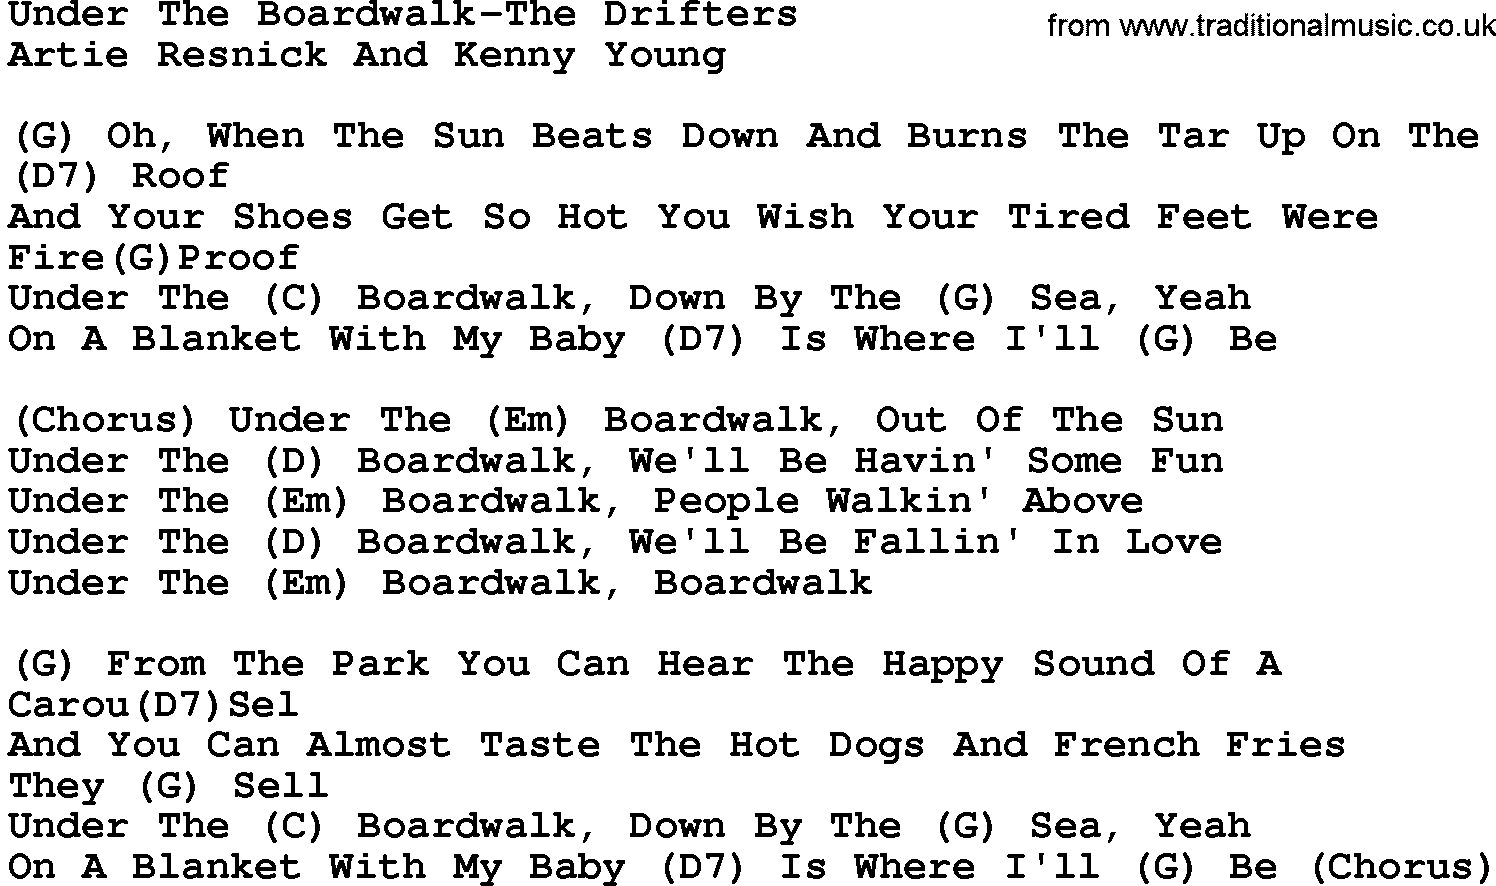 Country music song: Under The Boardwalk-The Drifters lyrics and chords